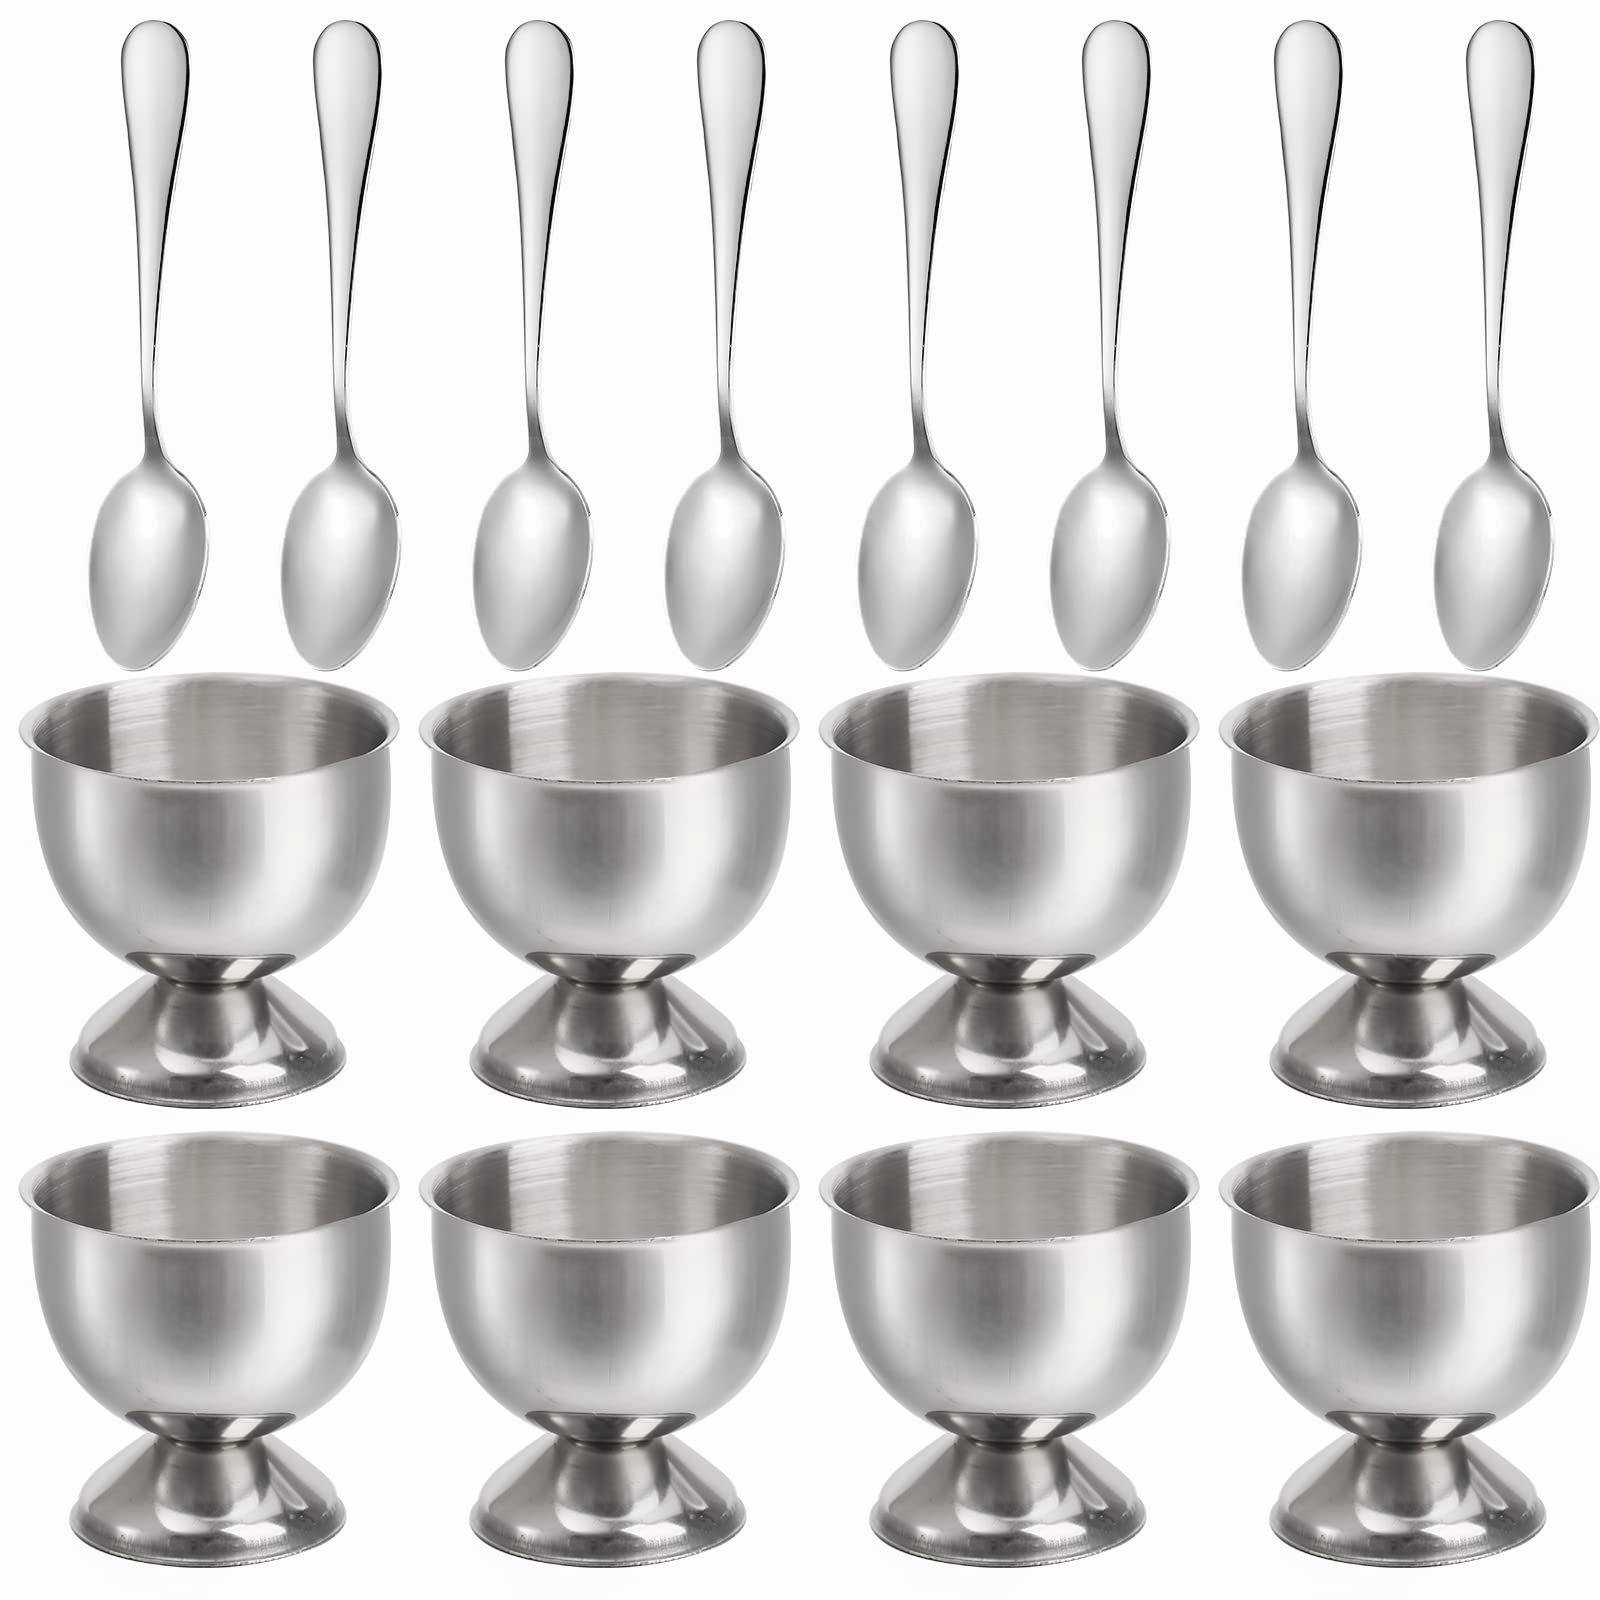 Elsjoy 8 Pack Egg Cup Holders with 8 Spoons, Stainless Steel Egg Cups Set for Soft & Hard Boiled Eggs, Kitchen Tools, Breakfast